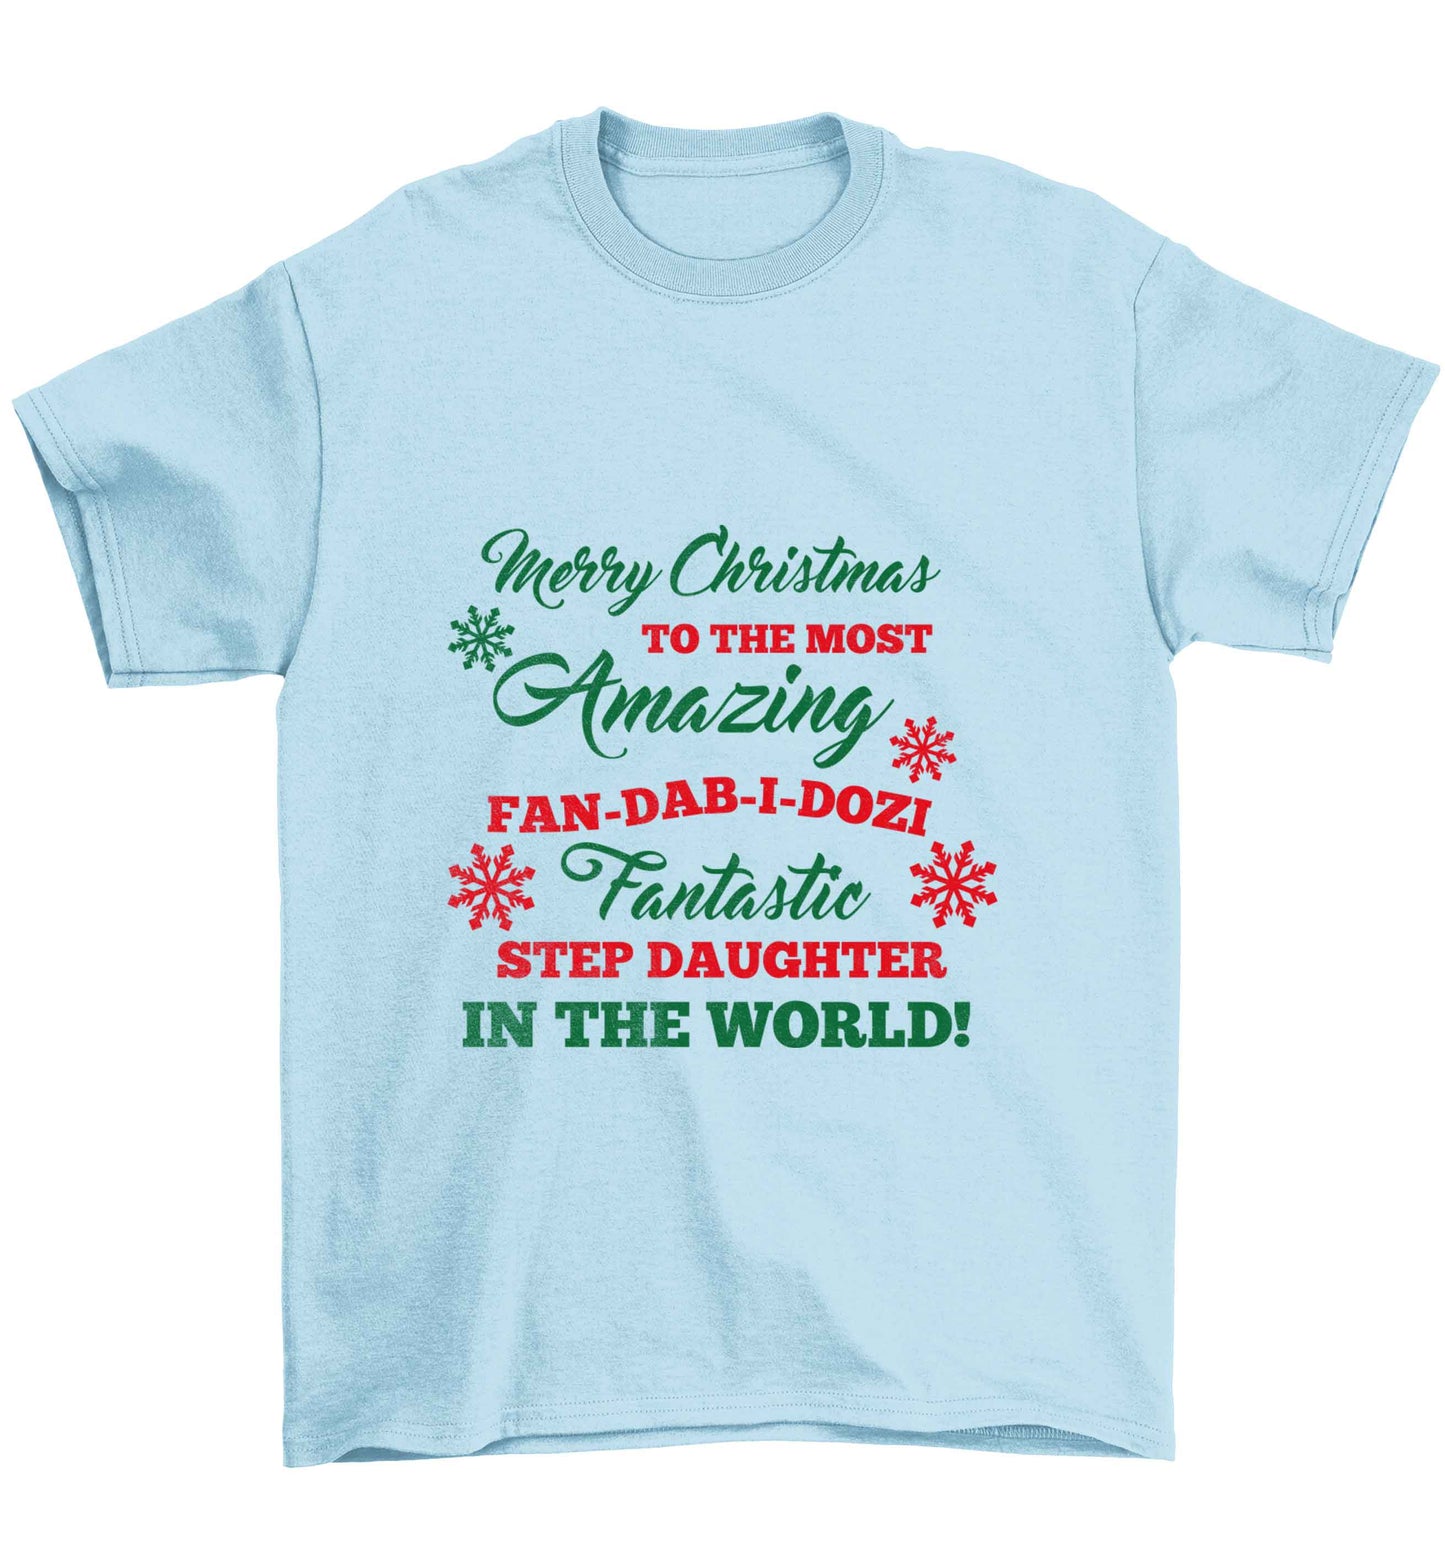 Merry Christmas to the most amazing fan-dab-i-dozi fantasic Step Daughter in the world Children's light blue Tshirt 12-13 Years